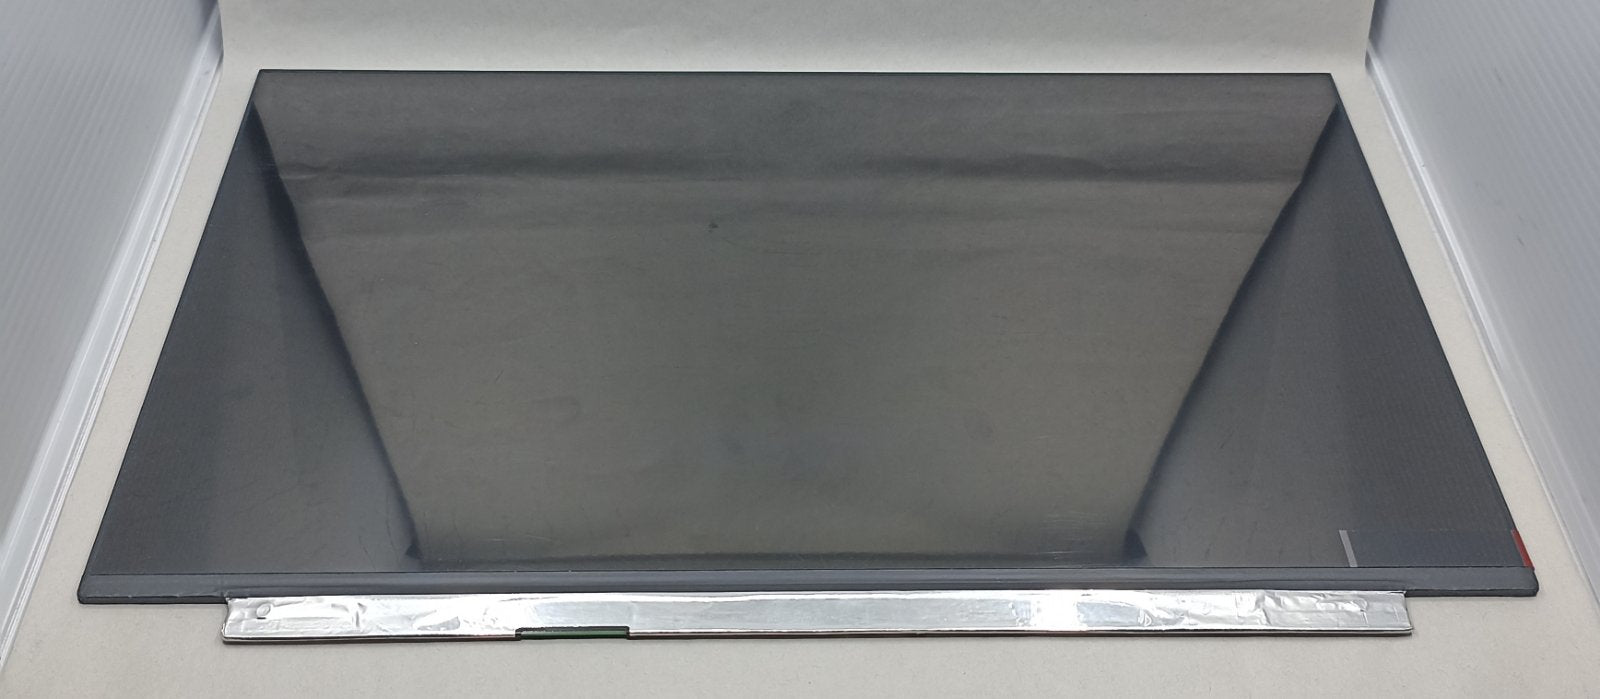 Replacement LCD for Acer SF315-51G WL